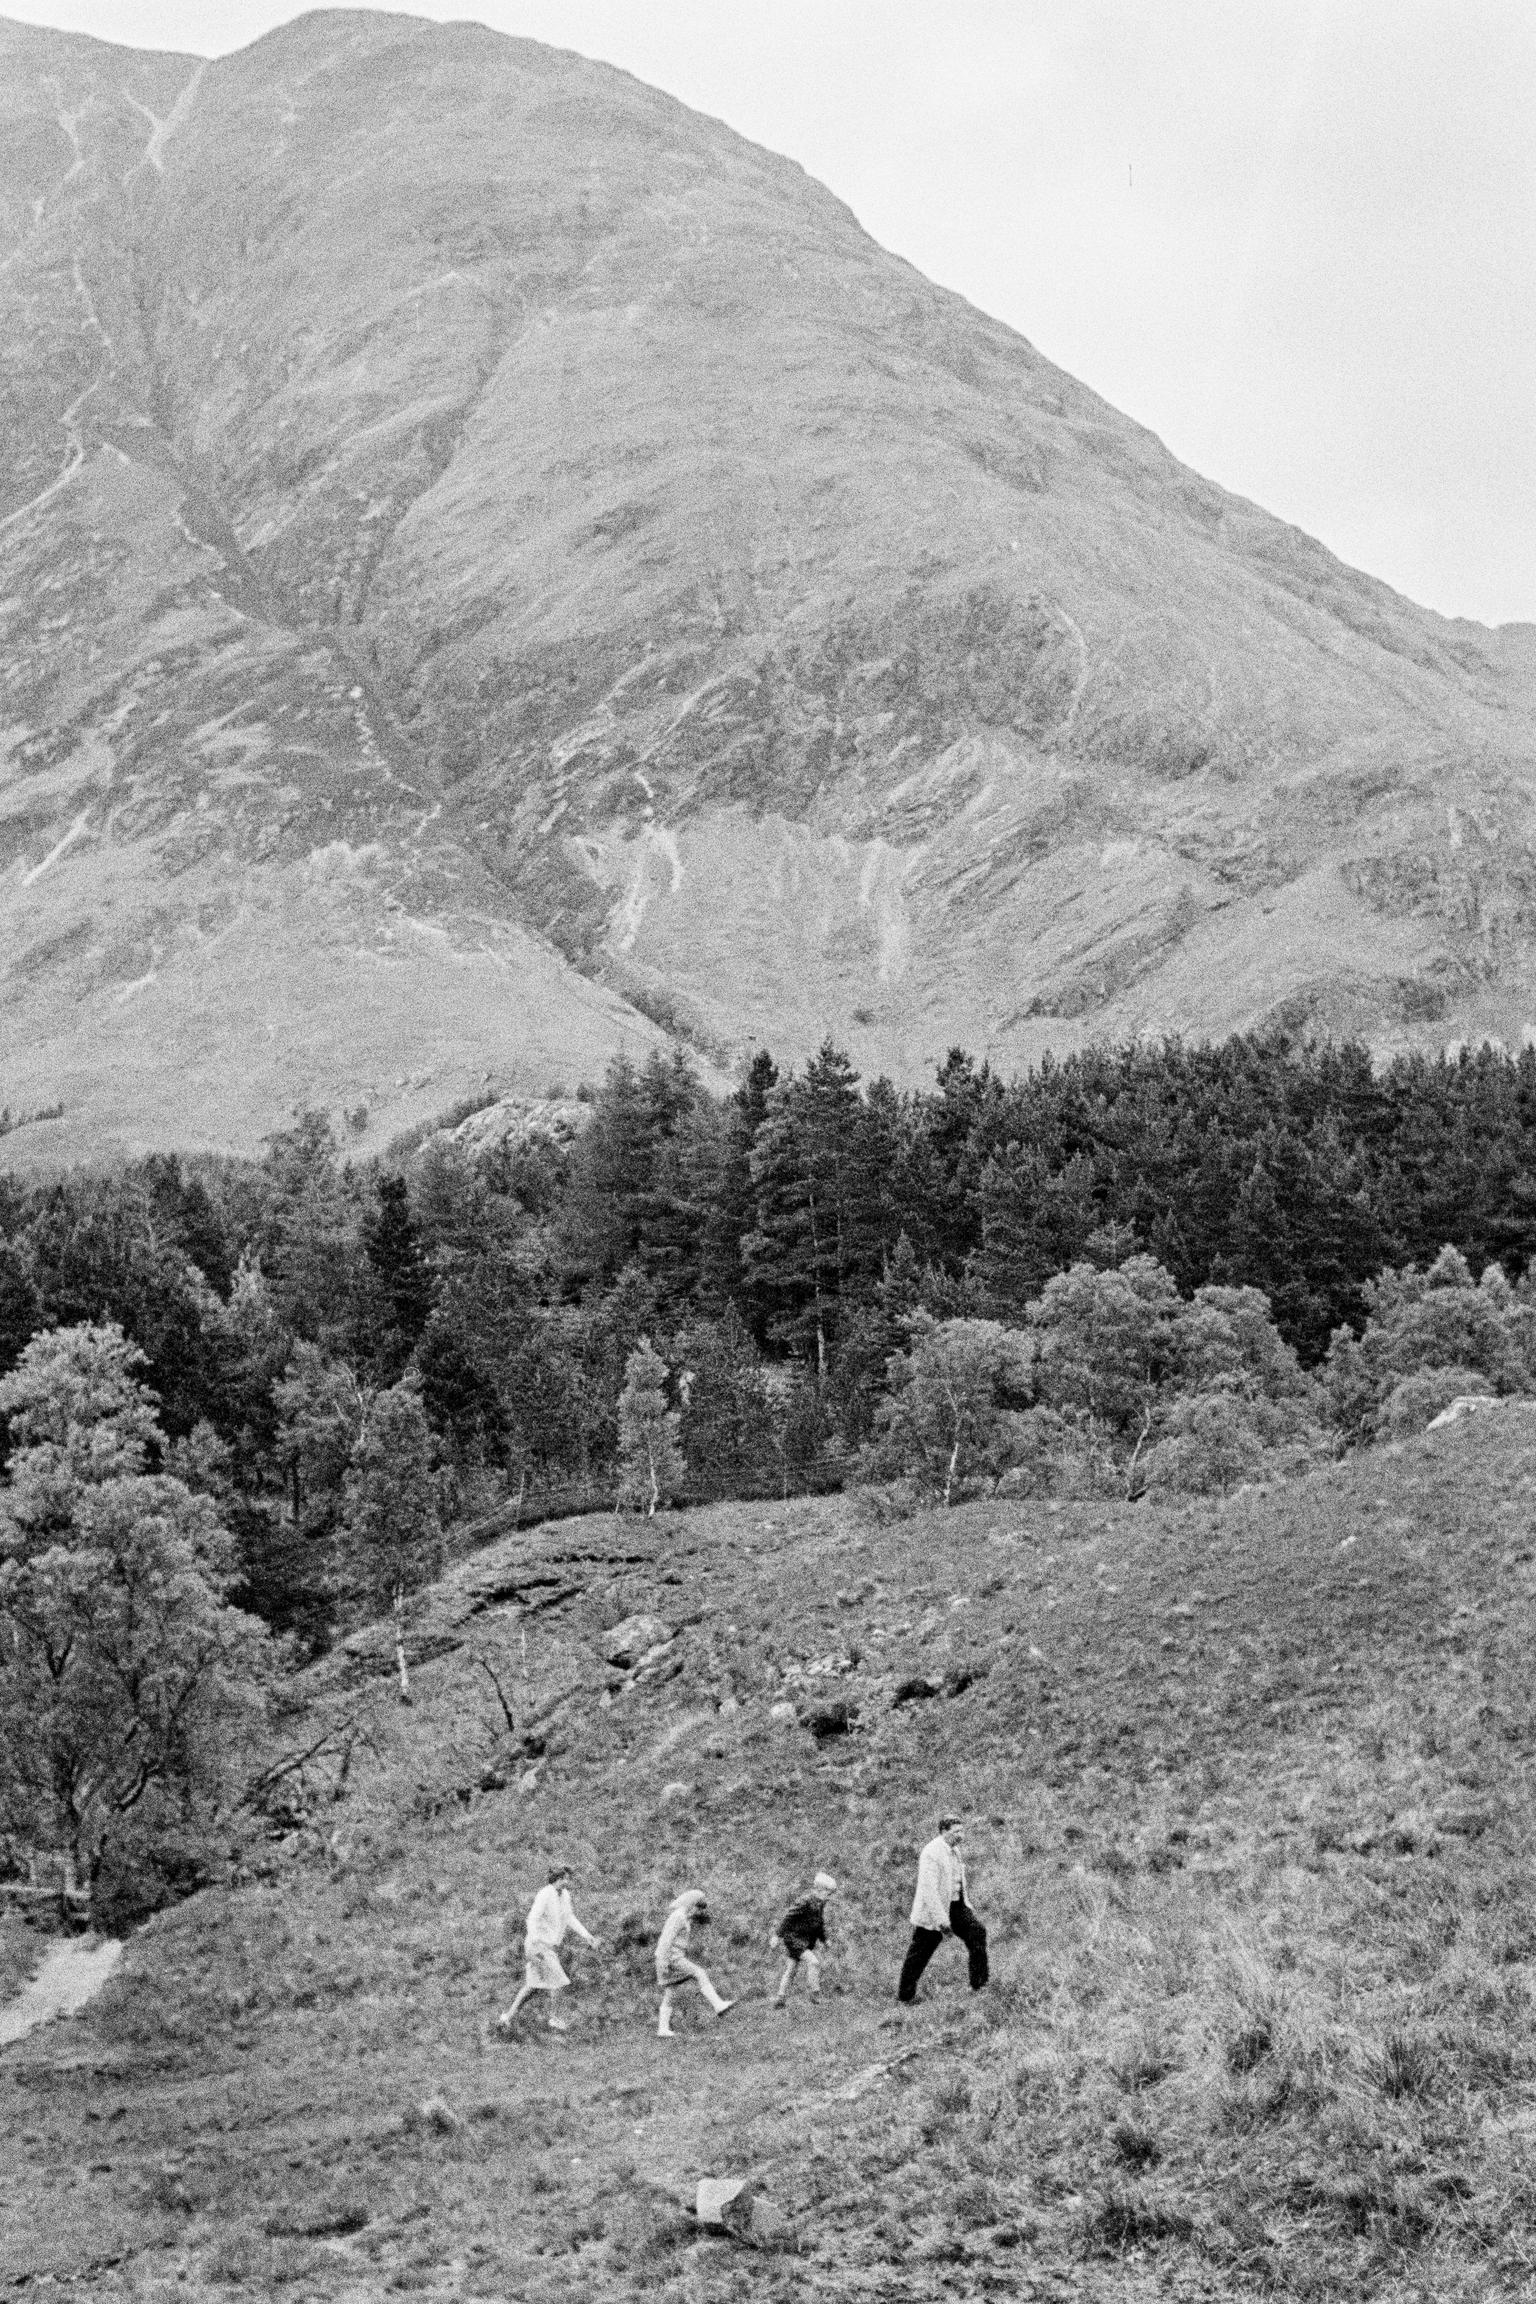 A family group walk across the hill-side with the Mountain Ben Nevis. Scotland